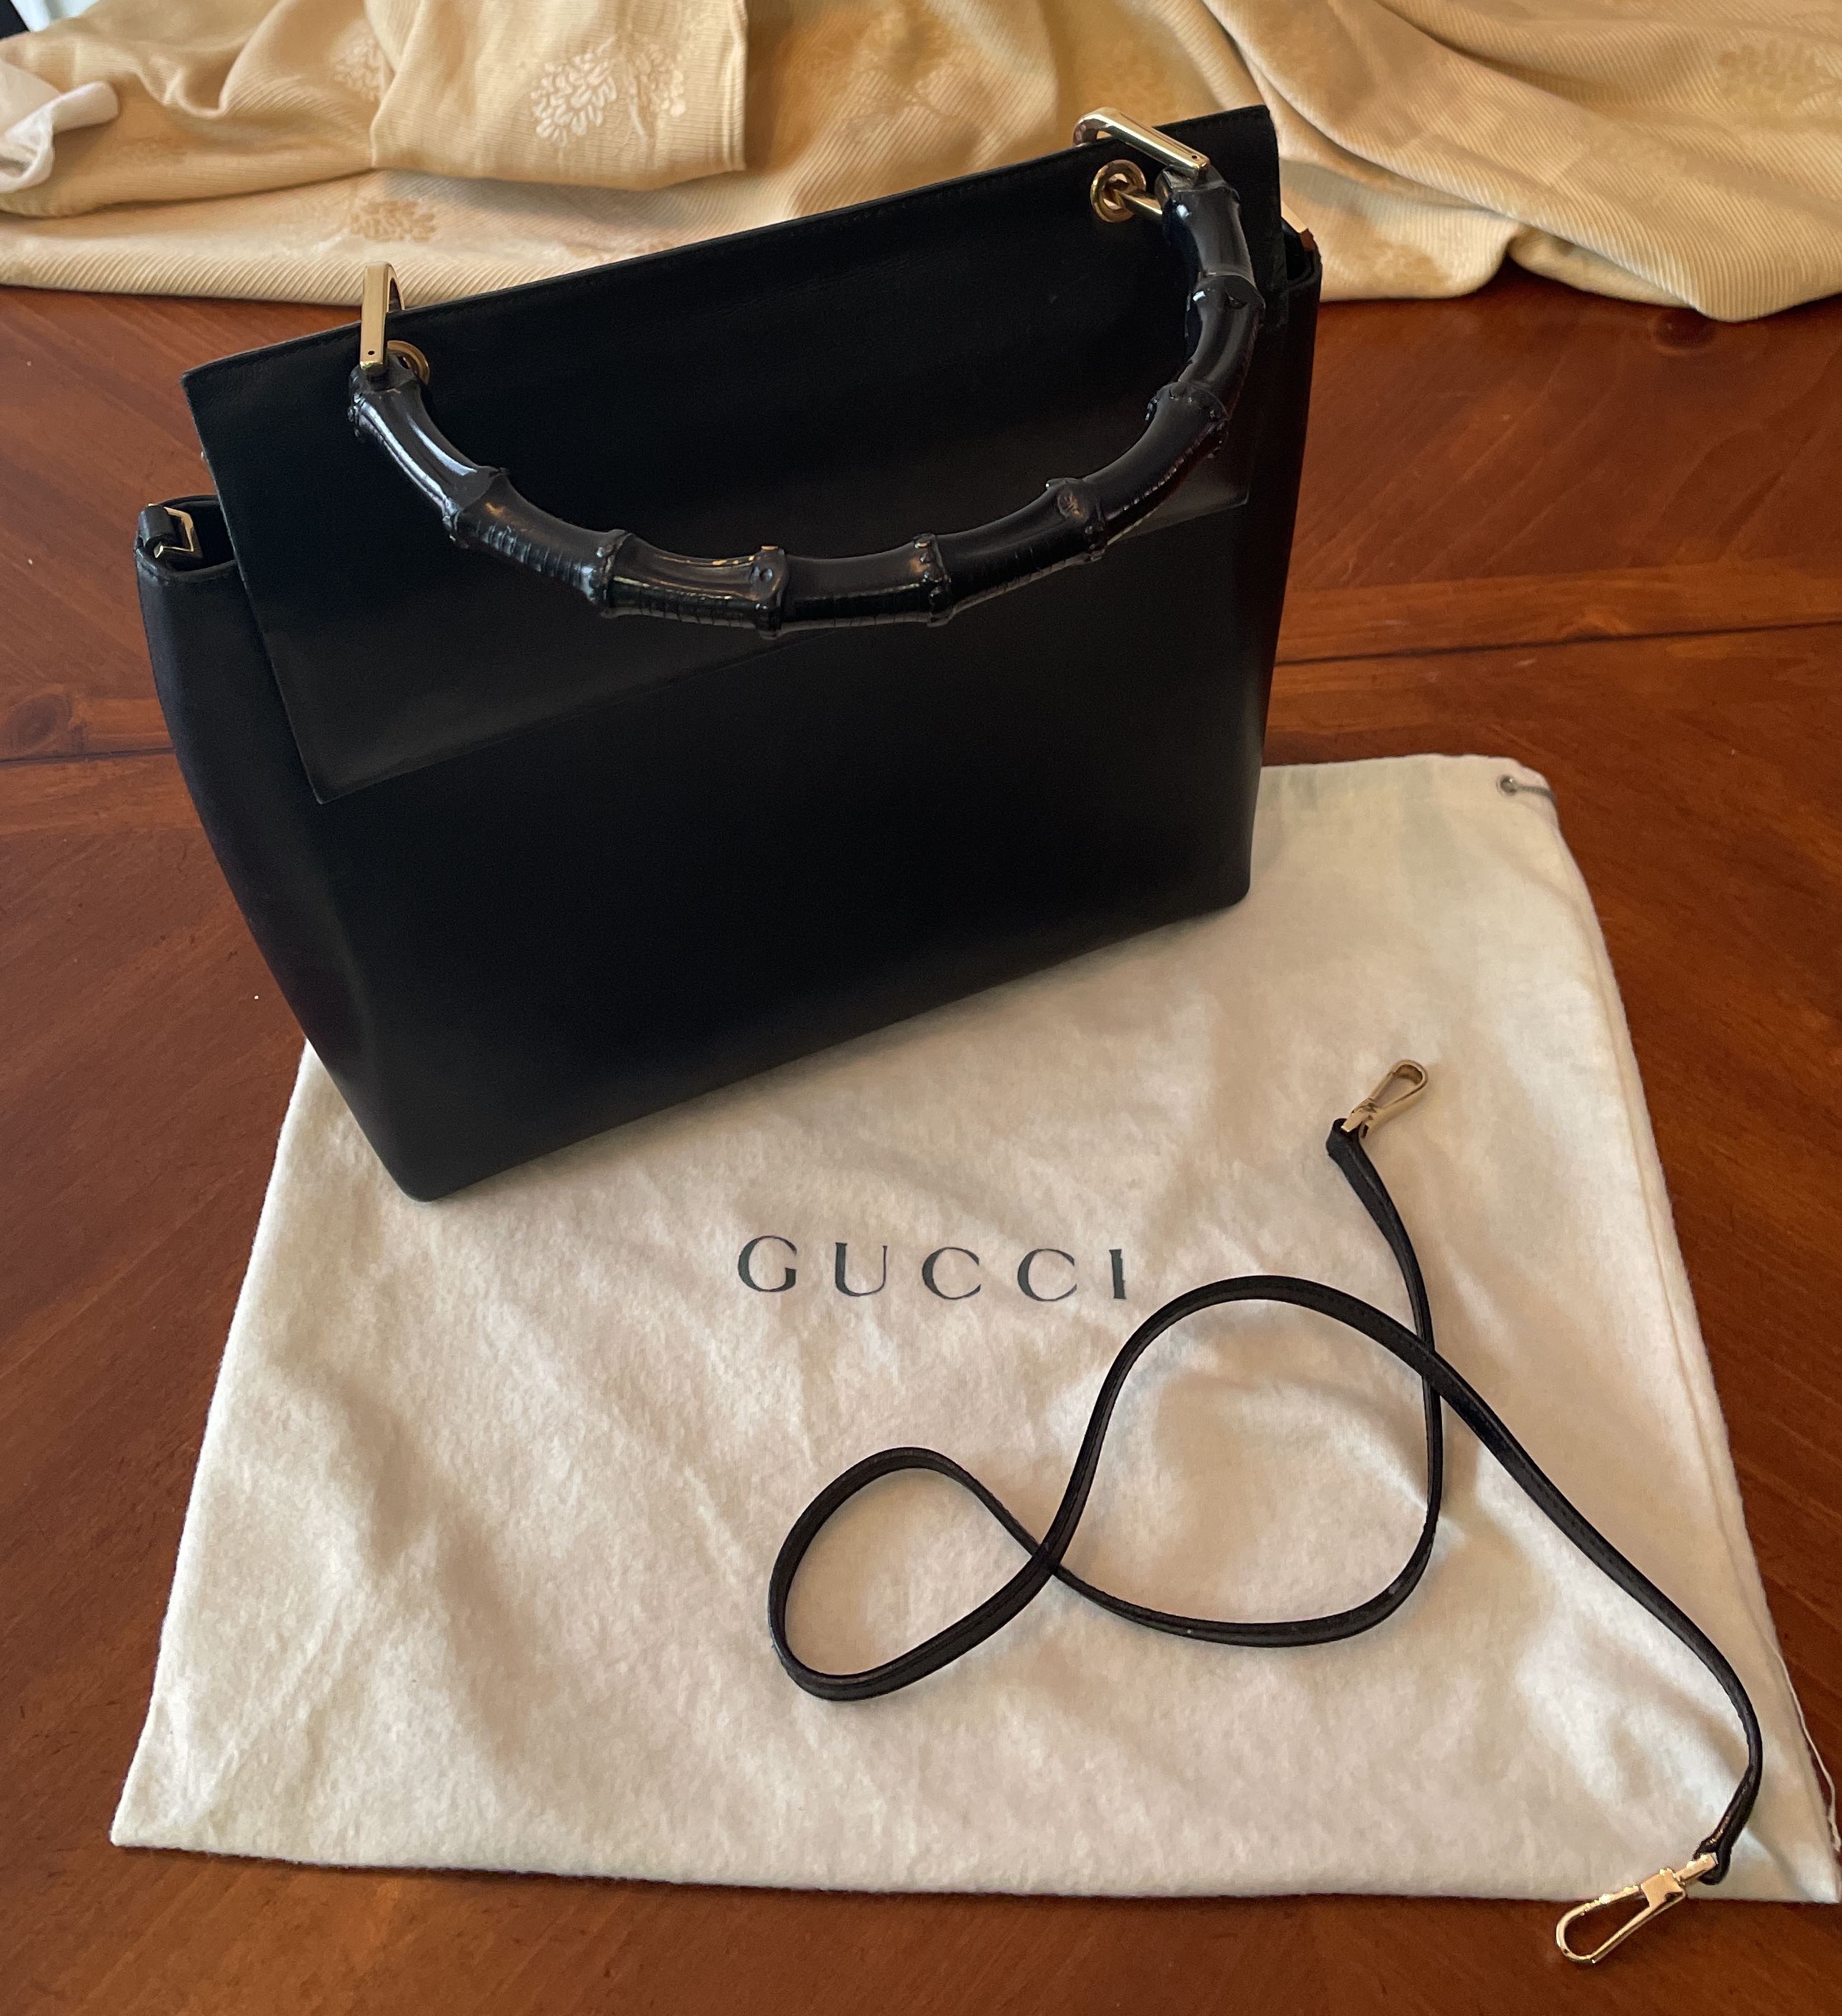 Desert vibes -#fashion  Gucci bags outlet, Bags, Gucci bag outfit